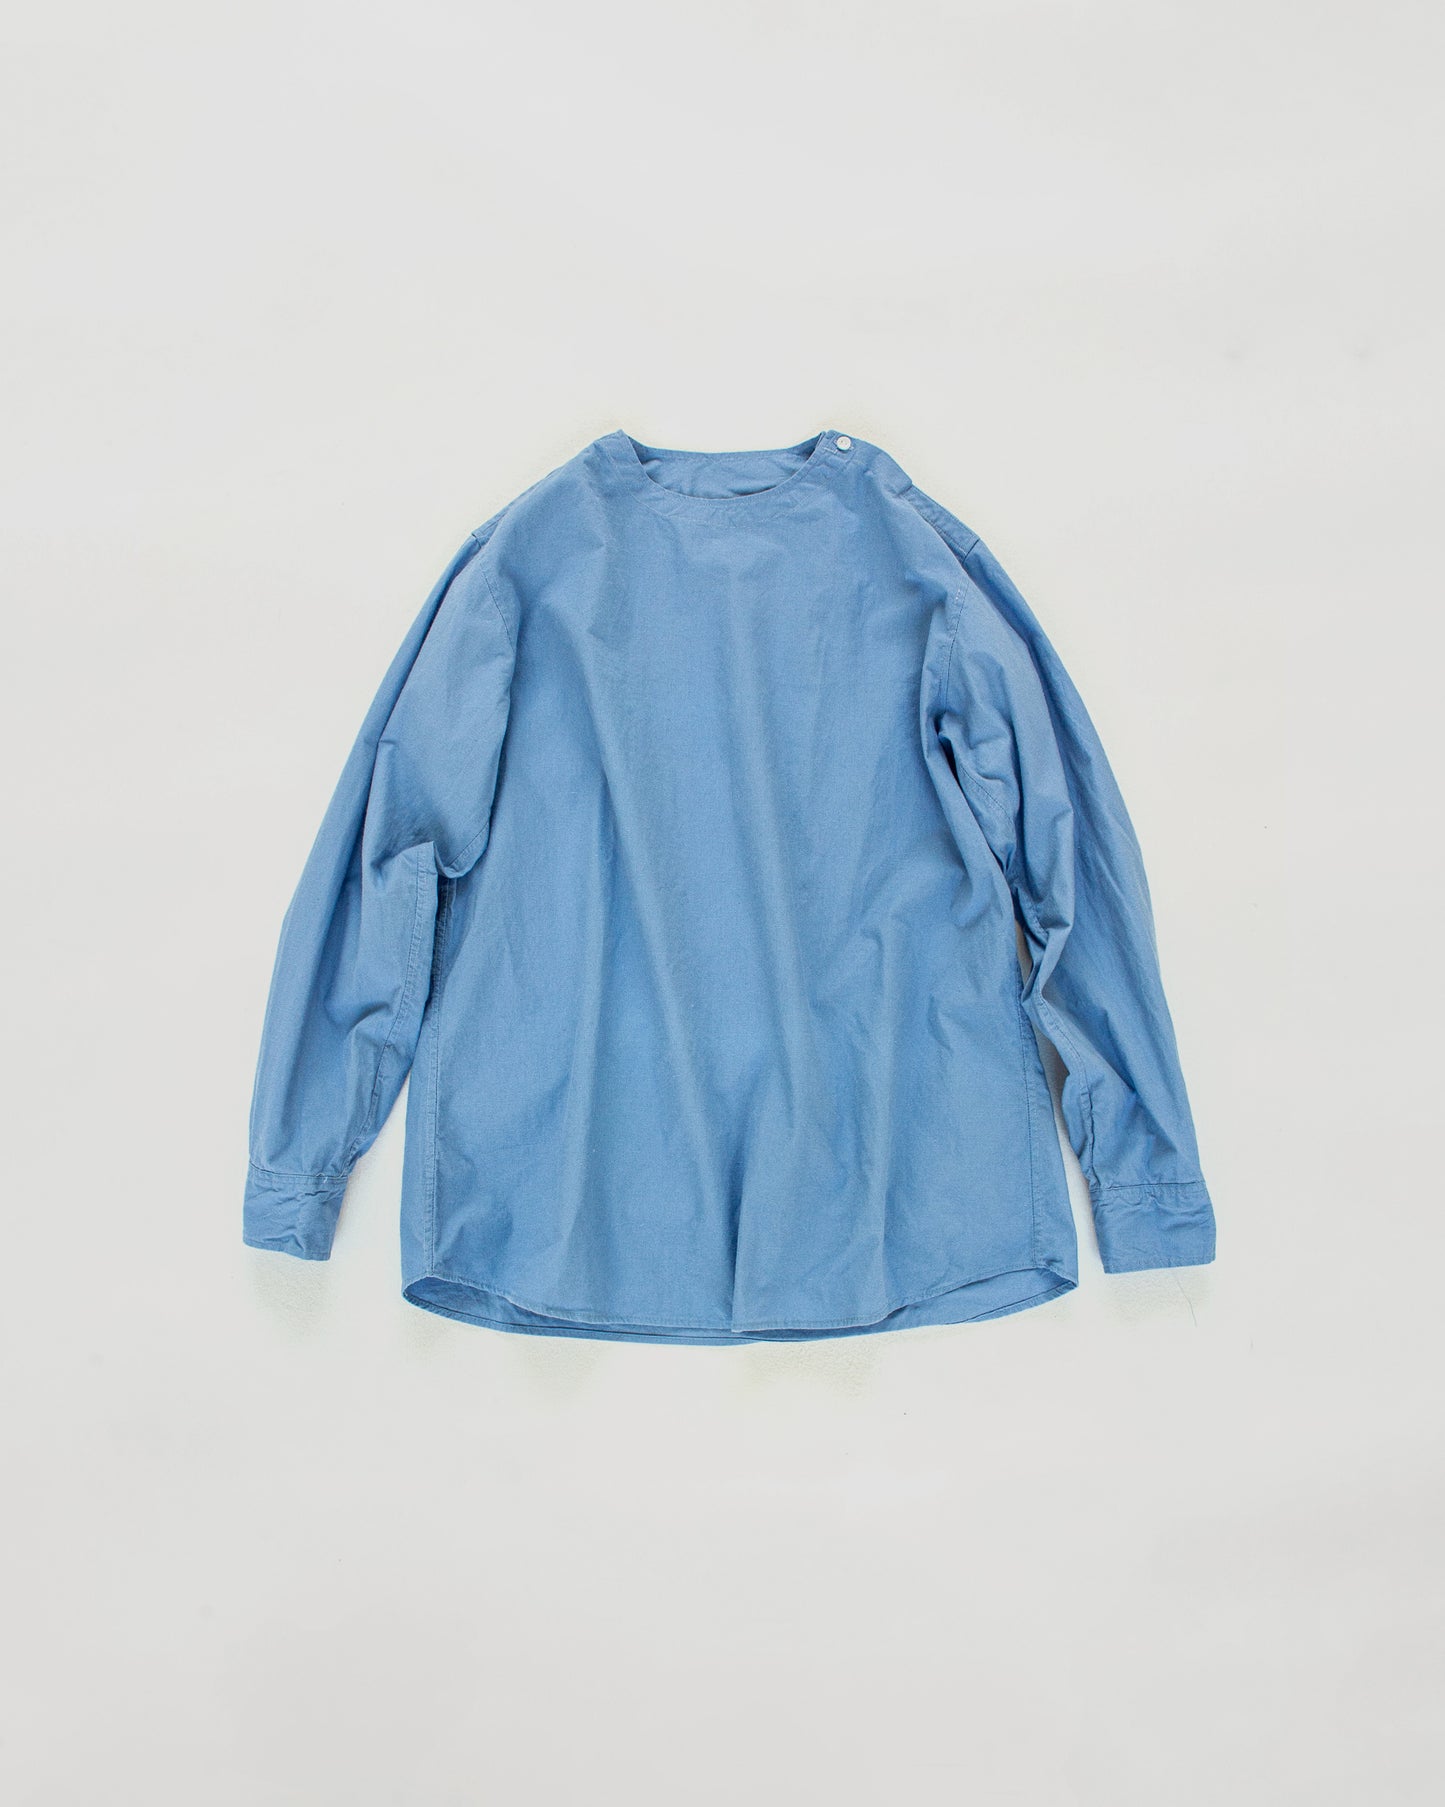 Blue Smock Made in Italy